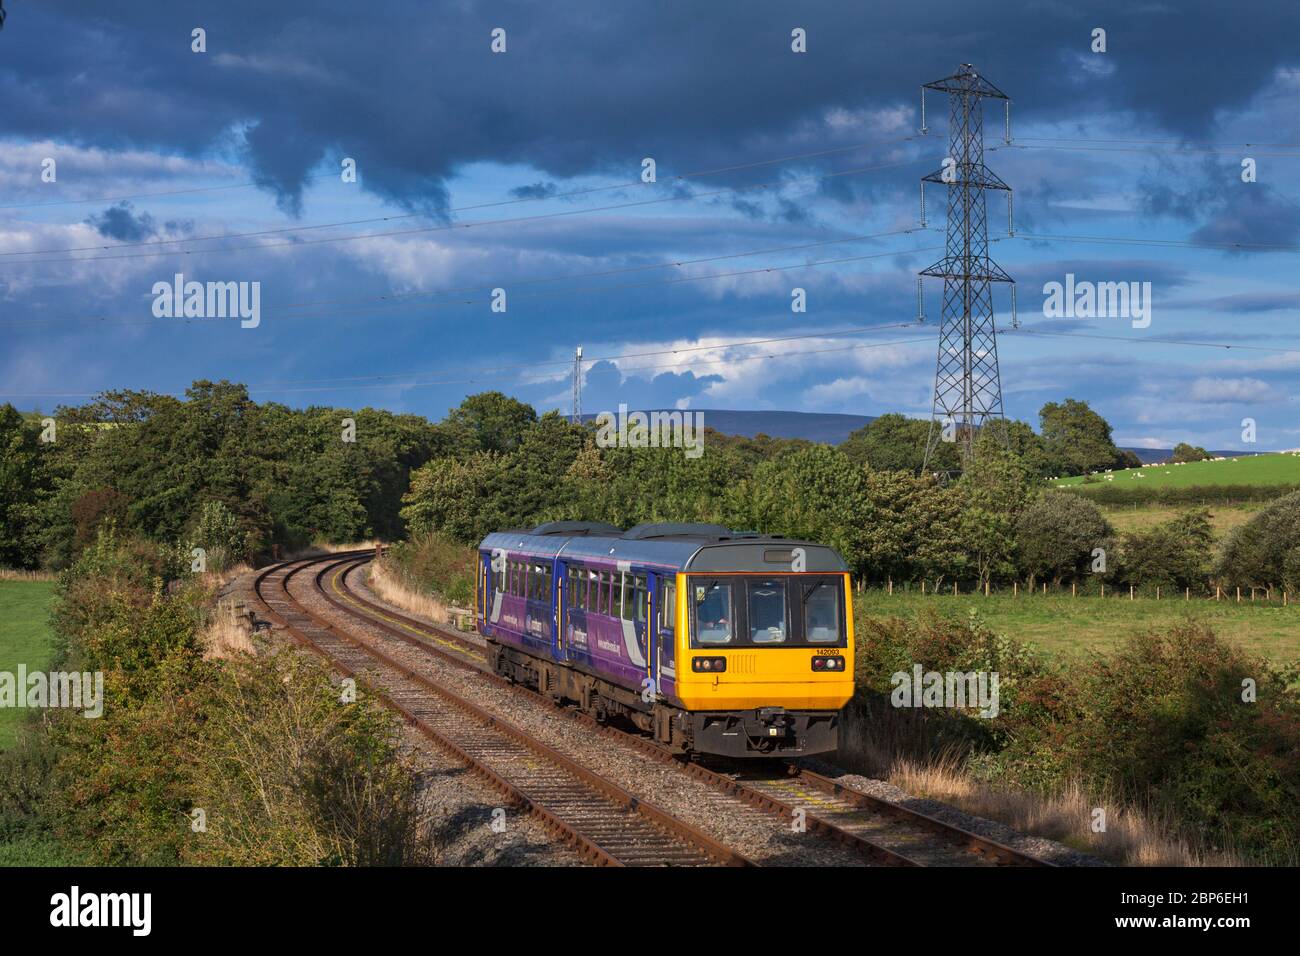 Northern rail class 142 pacer train 142093 on the scenic little north western railway line passing the countryside at Keerholme Stock Photo